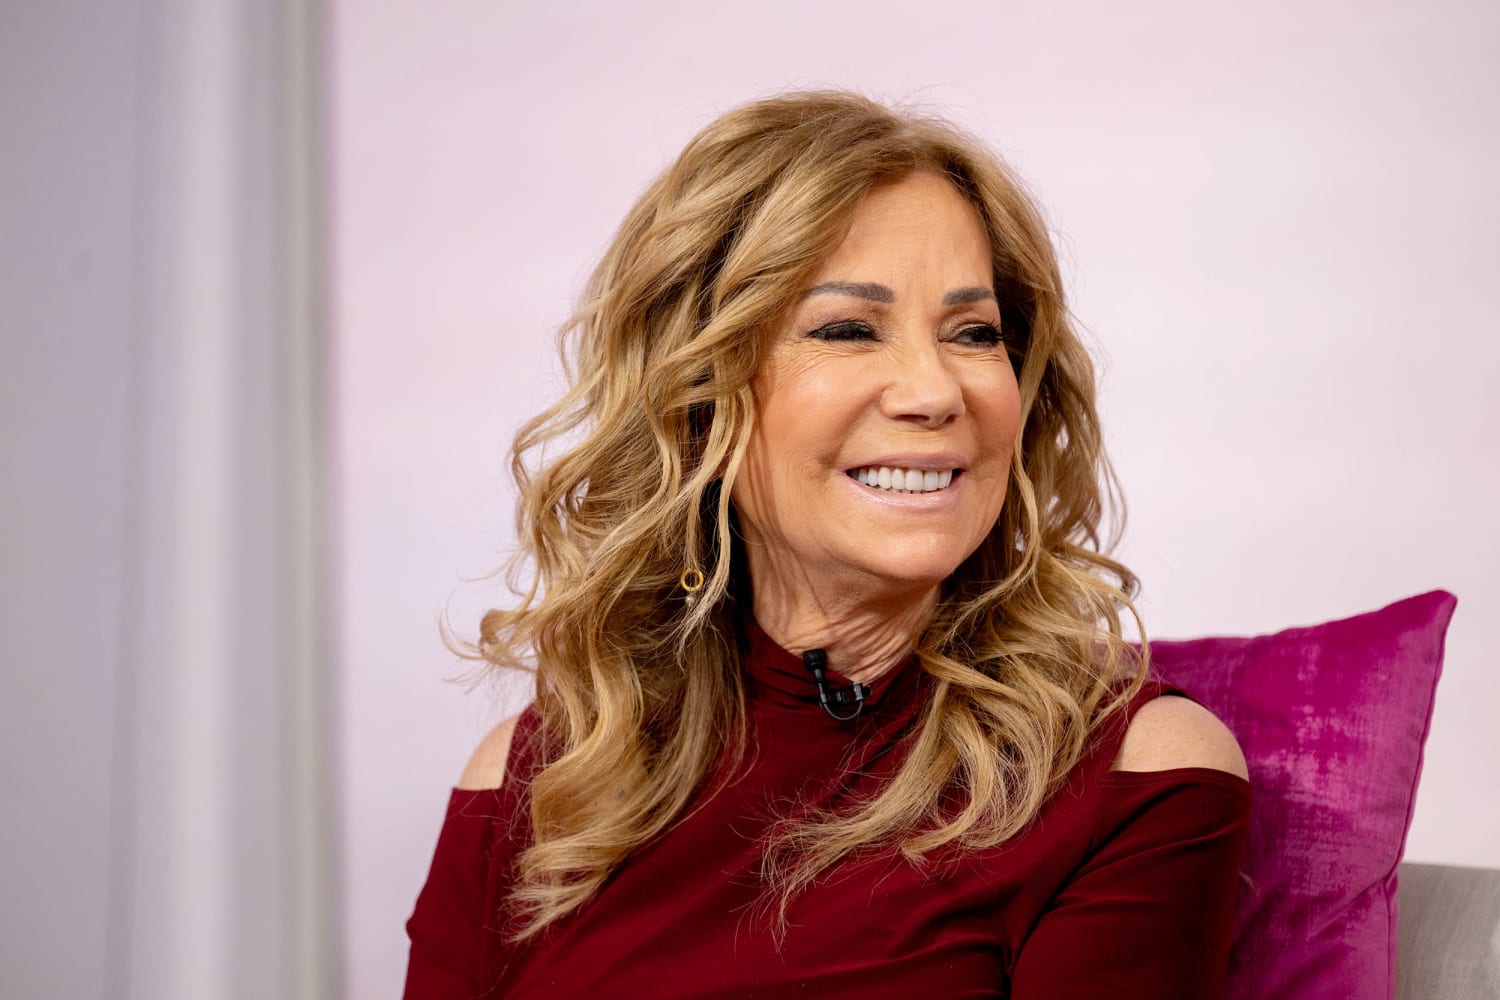 Kathie Lee Gifford Confirms She's Single: 'It's Always Hard'